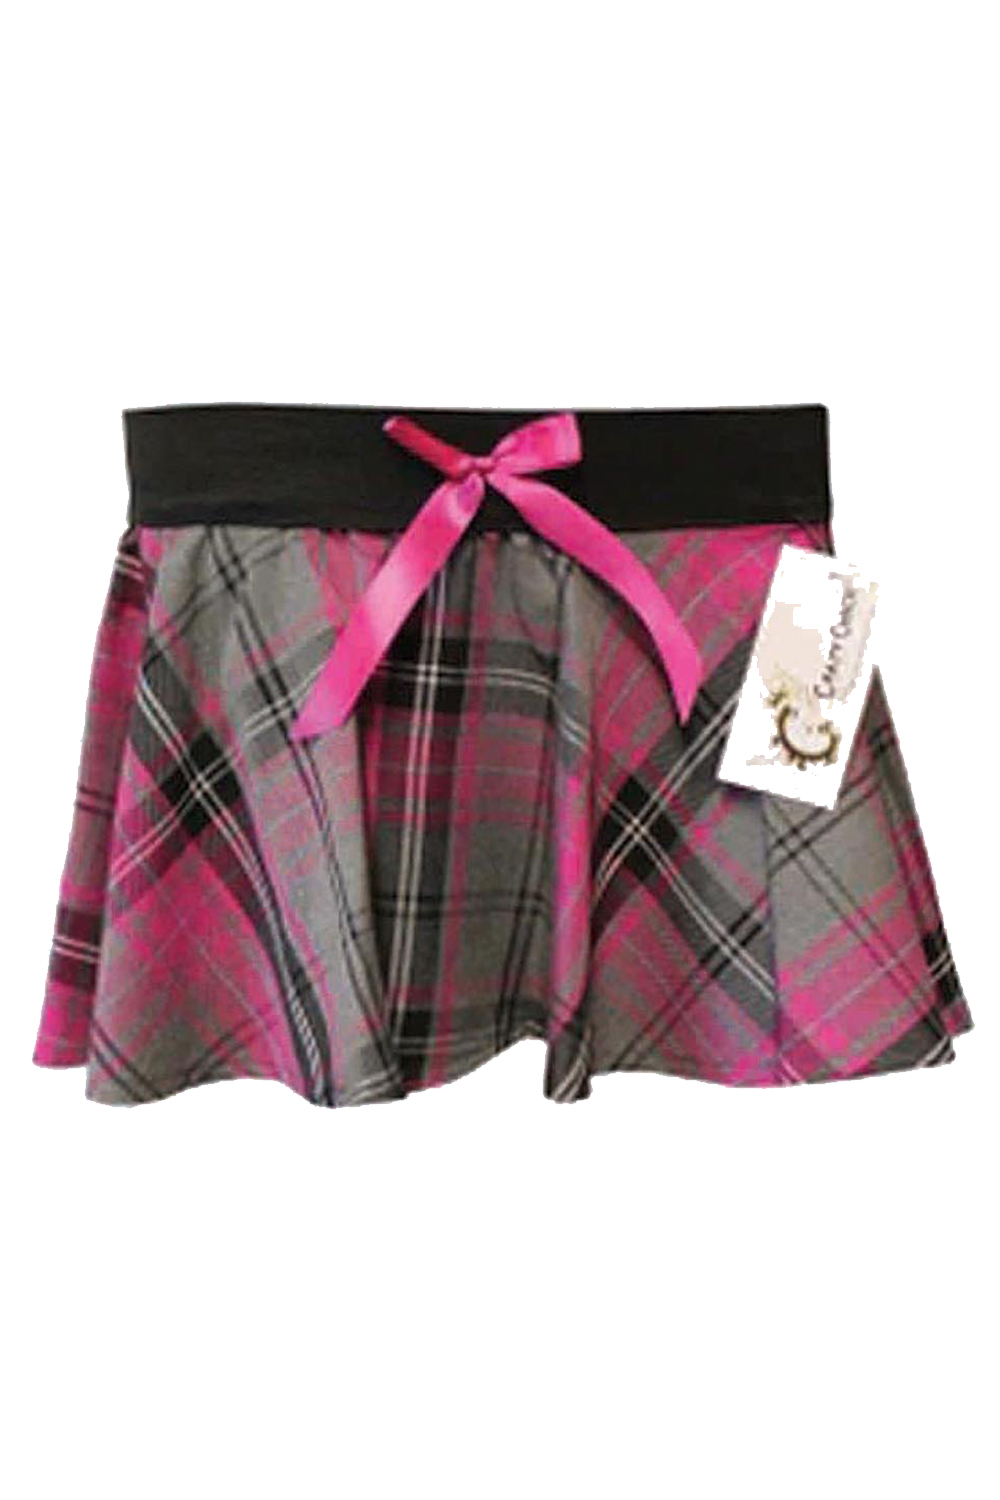 Crazy Chick Adult Pink Grey Black Tartan Skirt with Pink Bow (9 Inches)